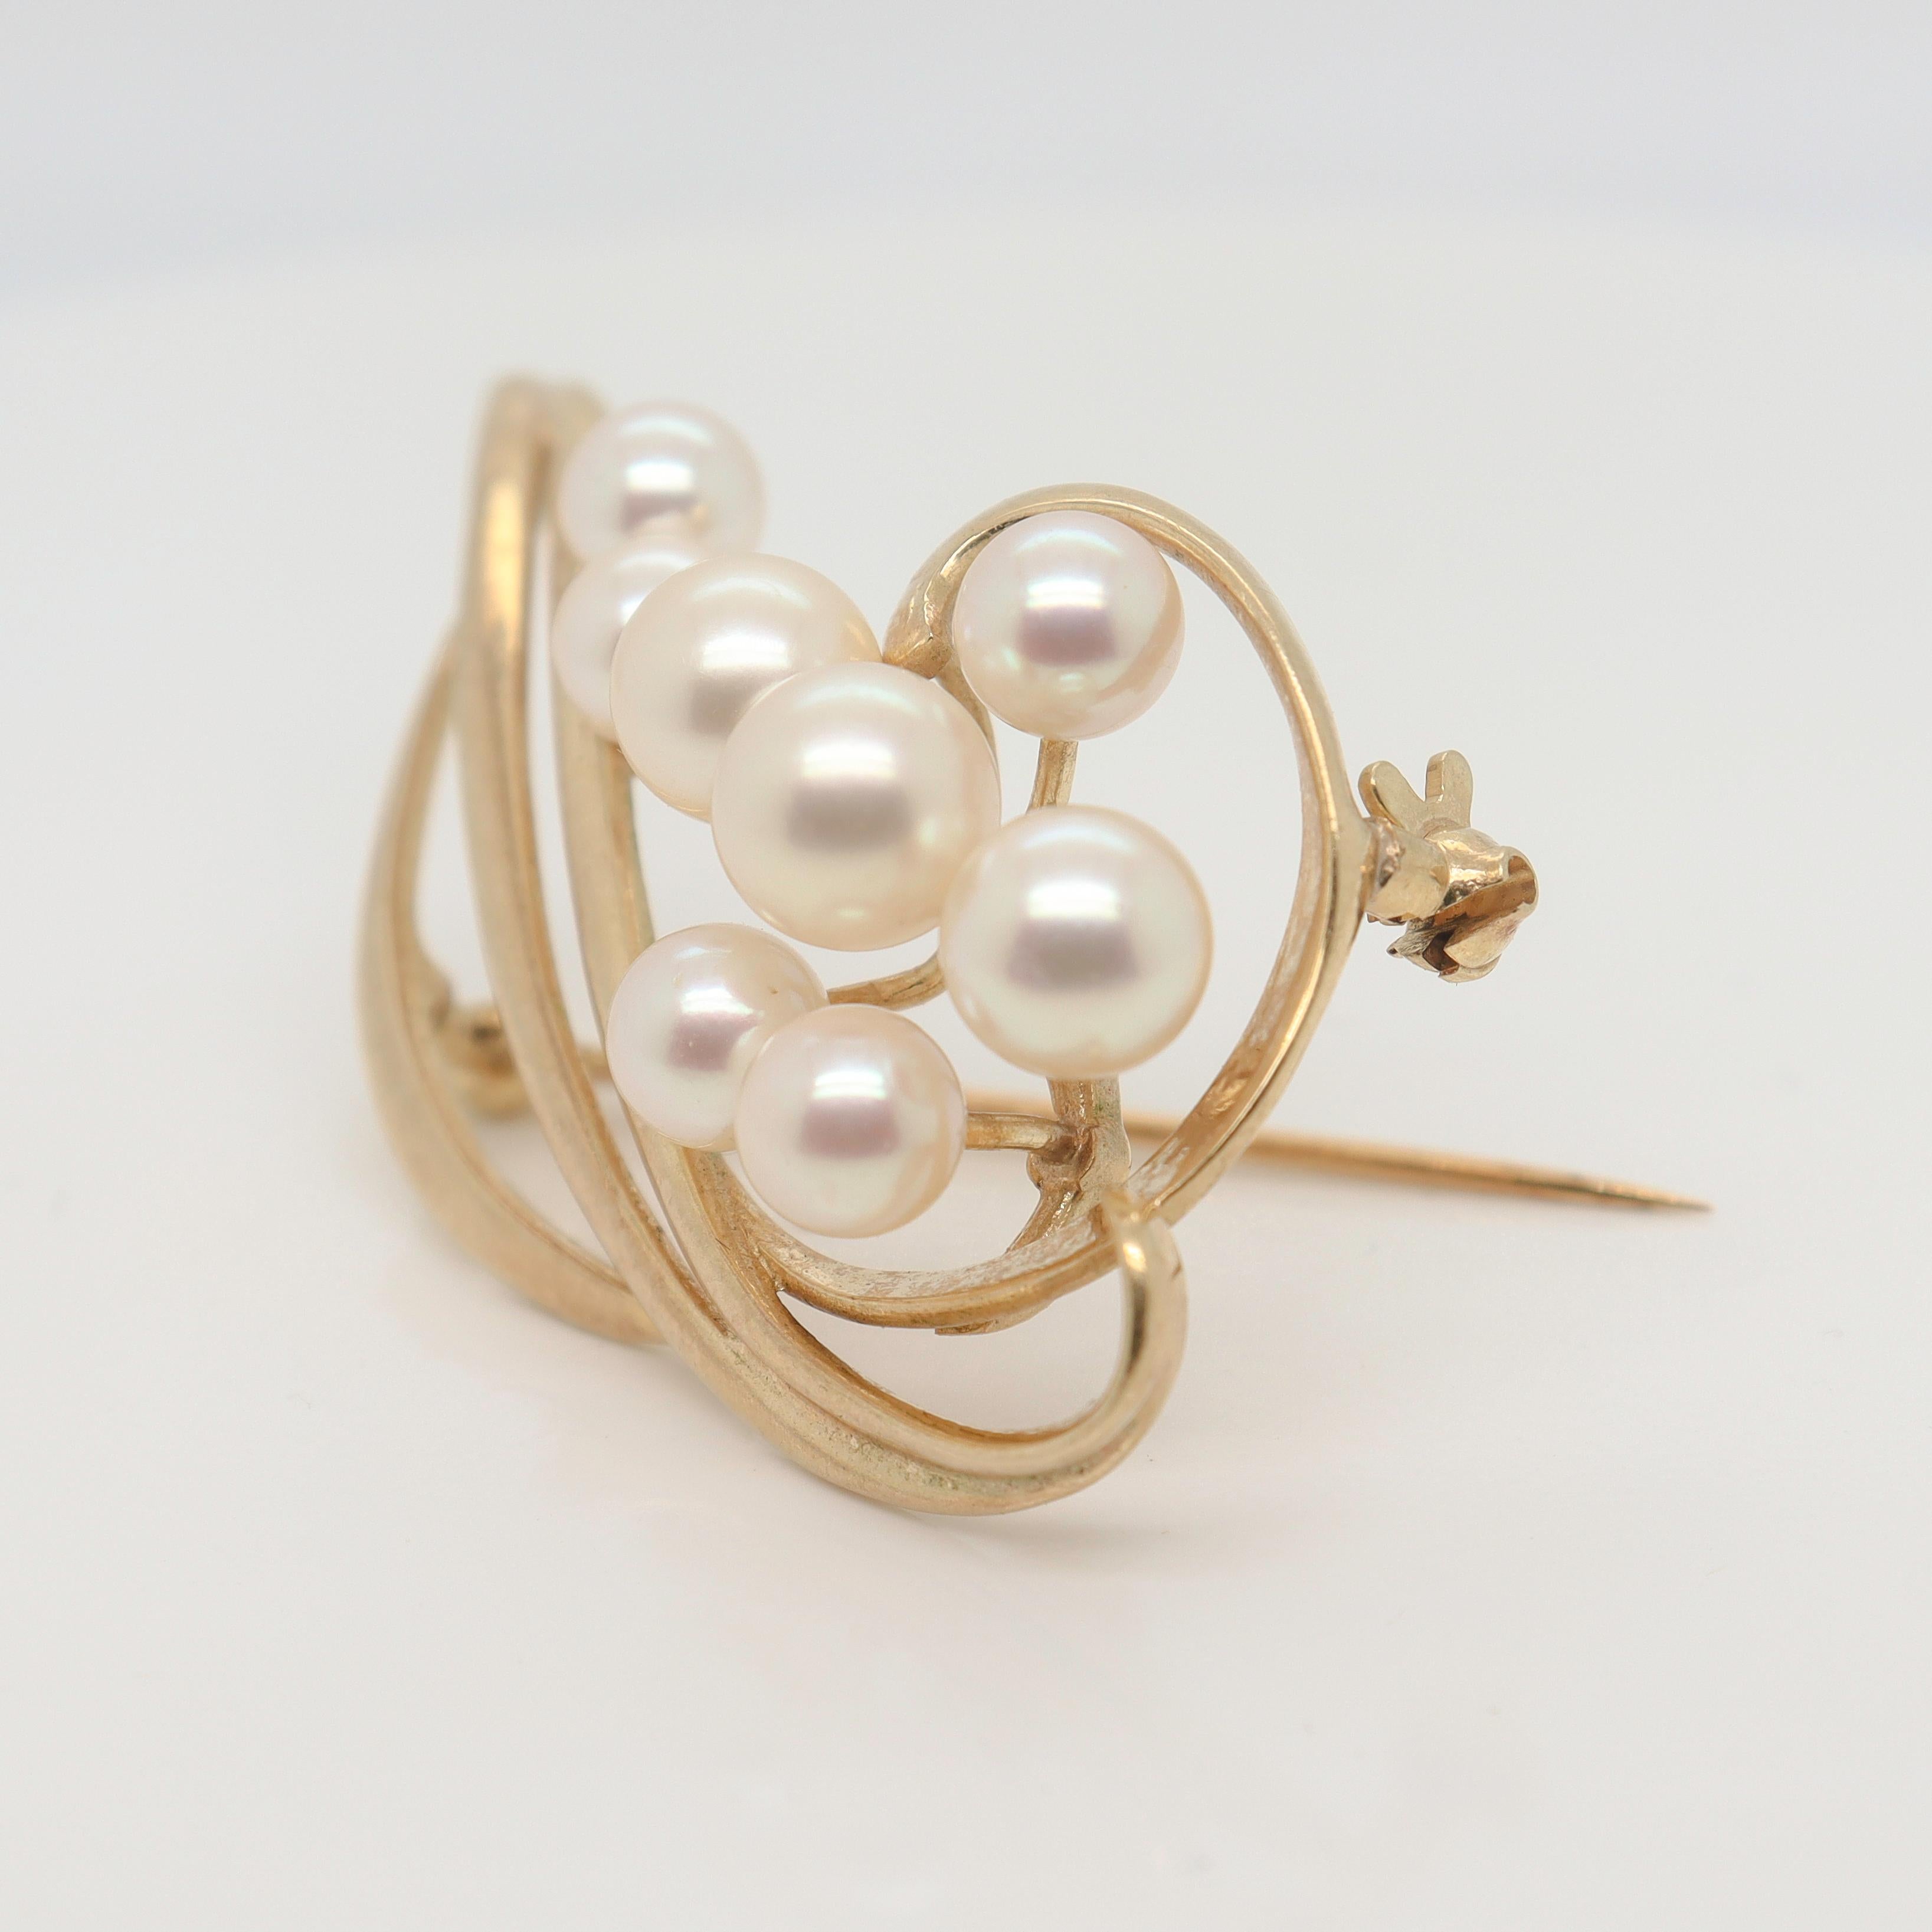 Mikimoto Modernist 14k Gold & Akoya Pearl Brooch or Pin For Sale 4